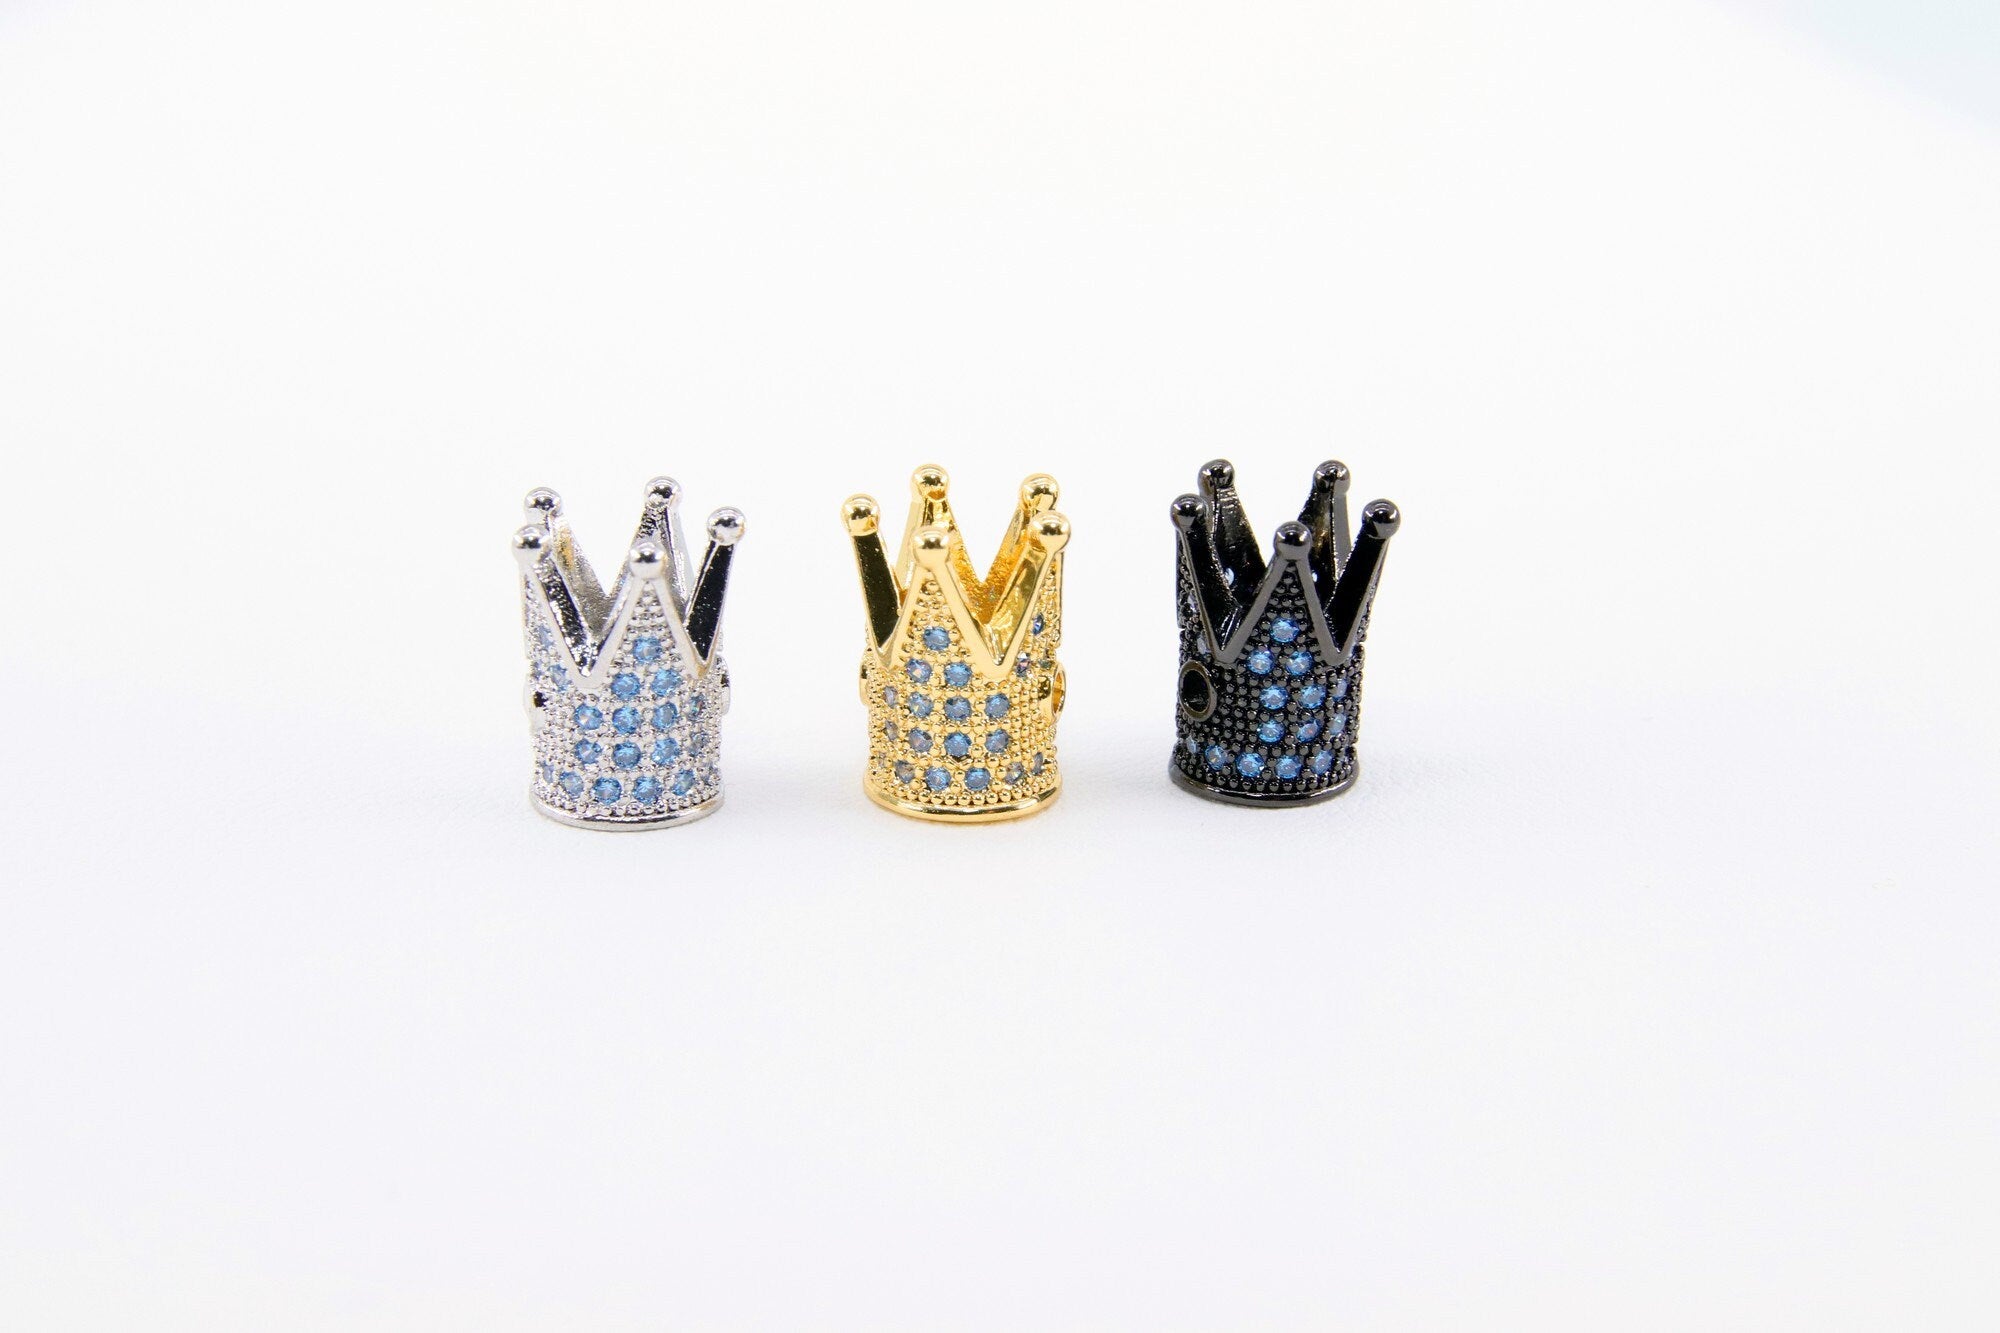 CZ Micro Pave Crown Shaped Beads, Aquamarine King Crown Spacer for Beaded Bracelets Necklaces, Gold